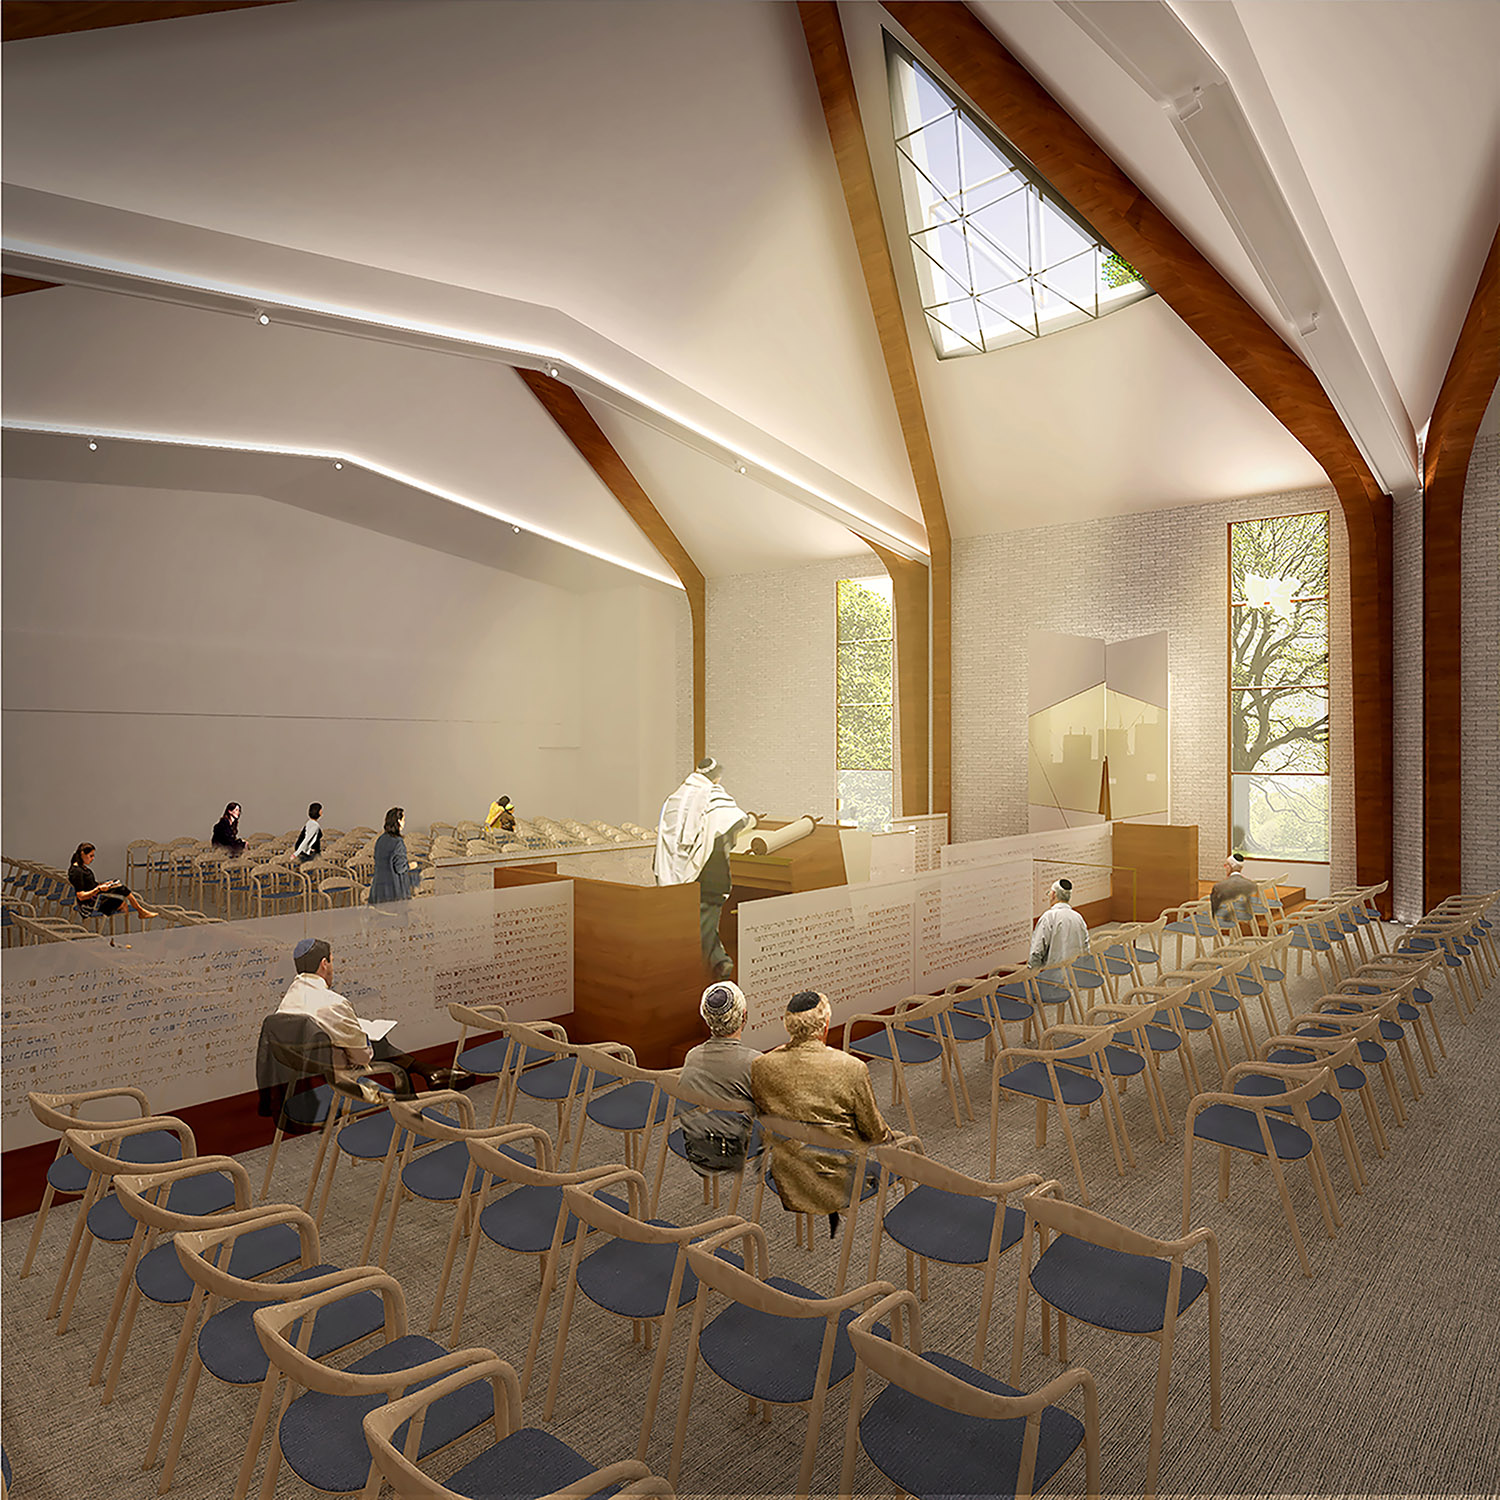 Sanctuary at Skokie Valley Synagogue. Rendering by Studio ST Architects